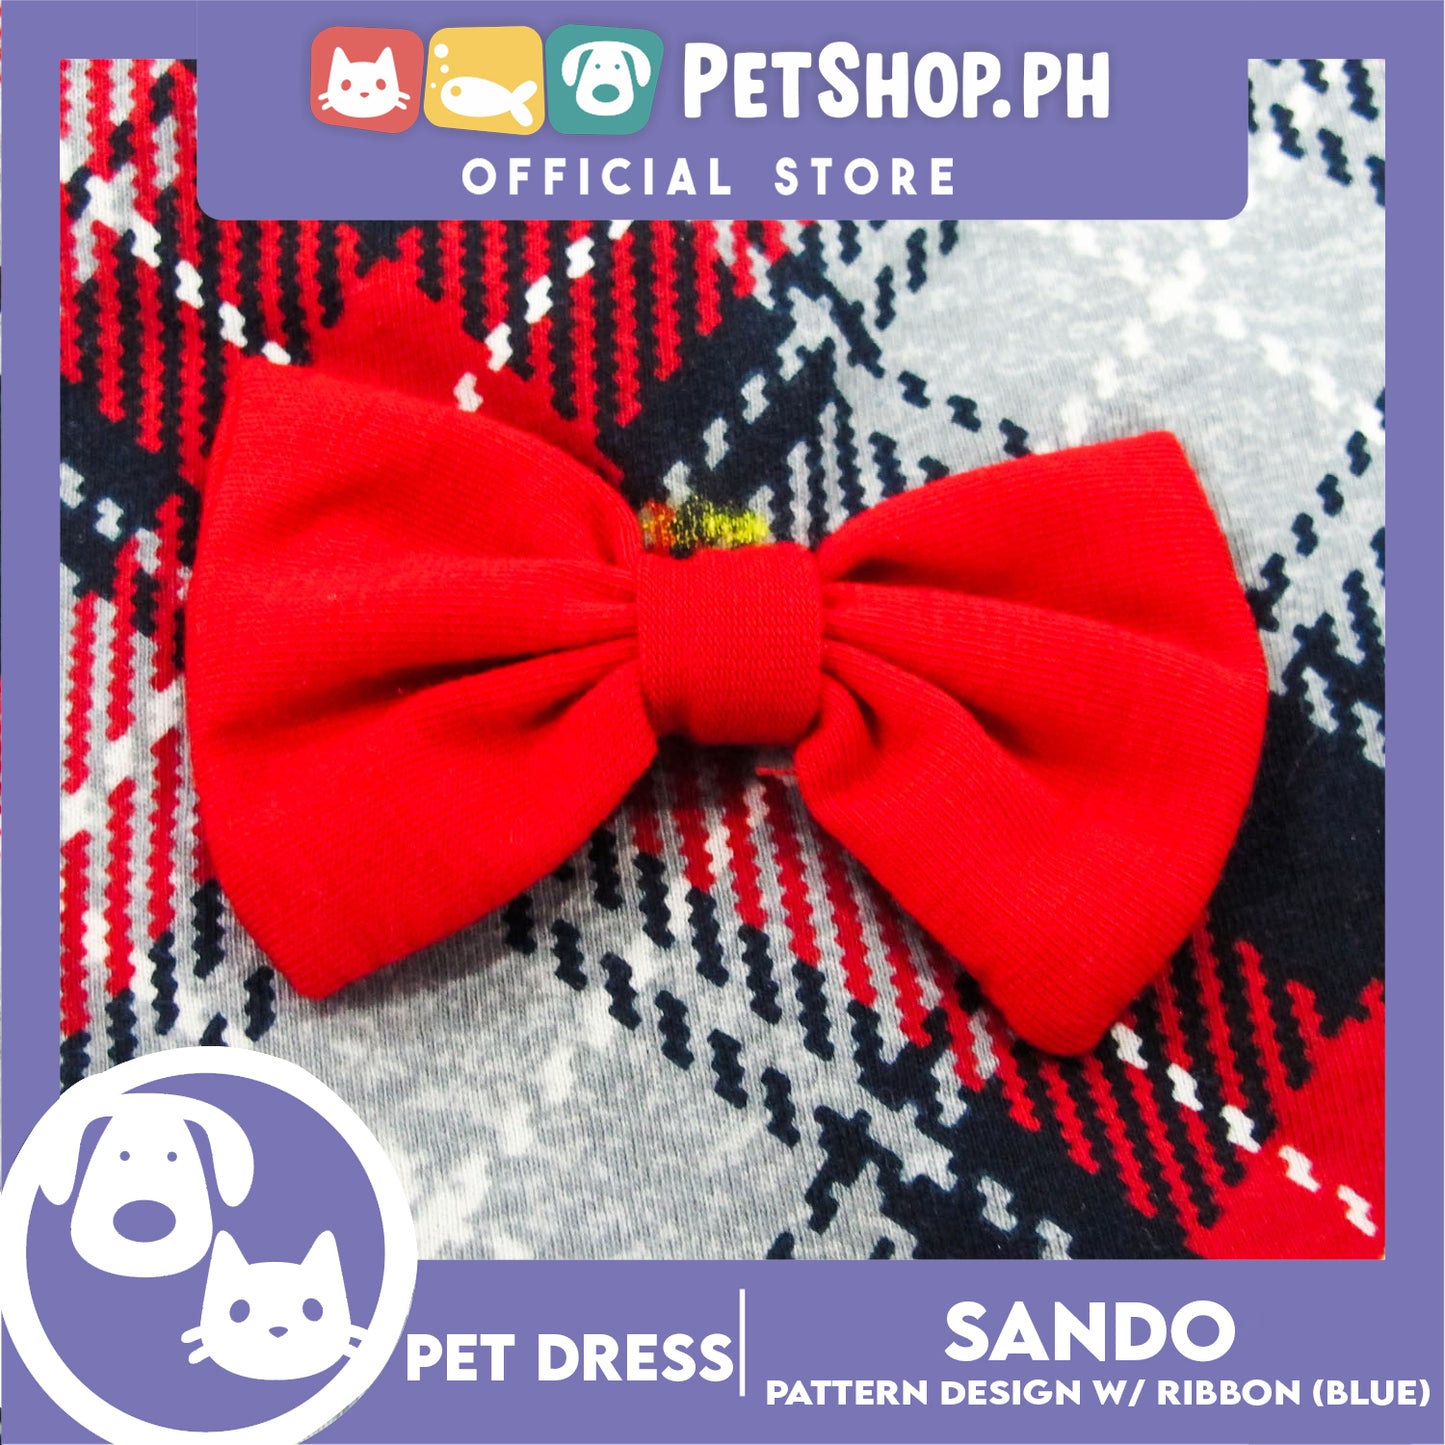 Pet Dress Summer Blue Checkered Skirt with Red Riboon (M) for Small Dog and Cat- Cute Pet Clothes,Pet Skirt & Girl Sando Dress